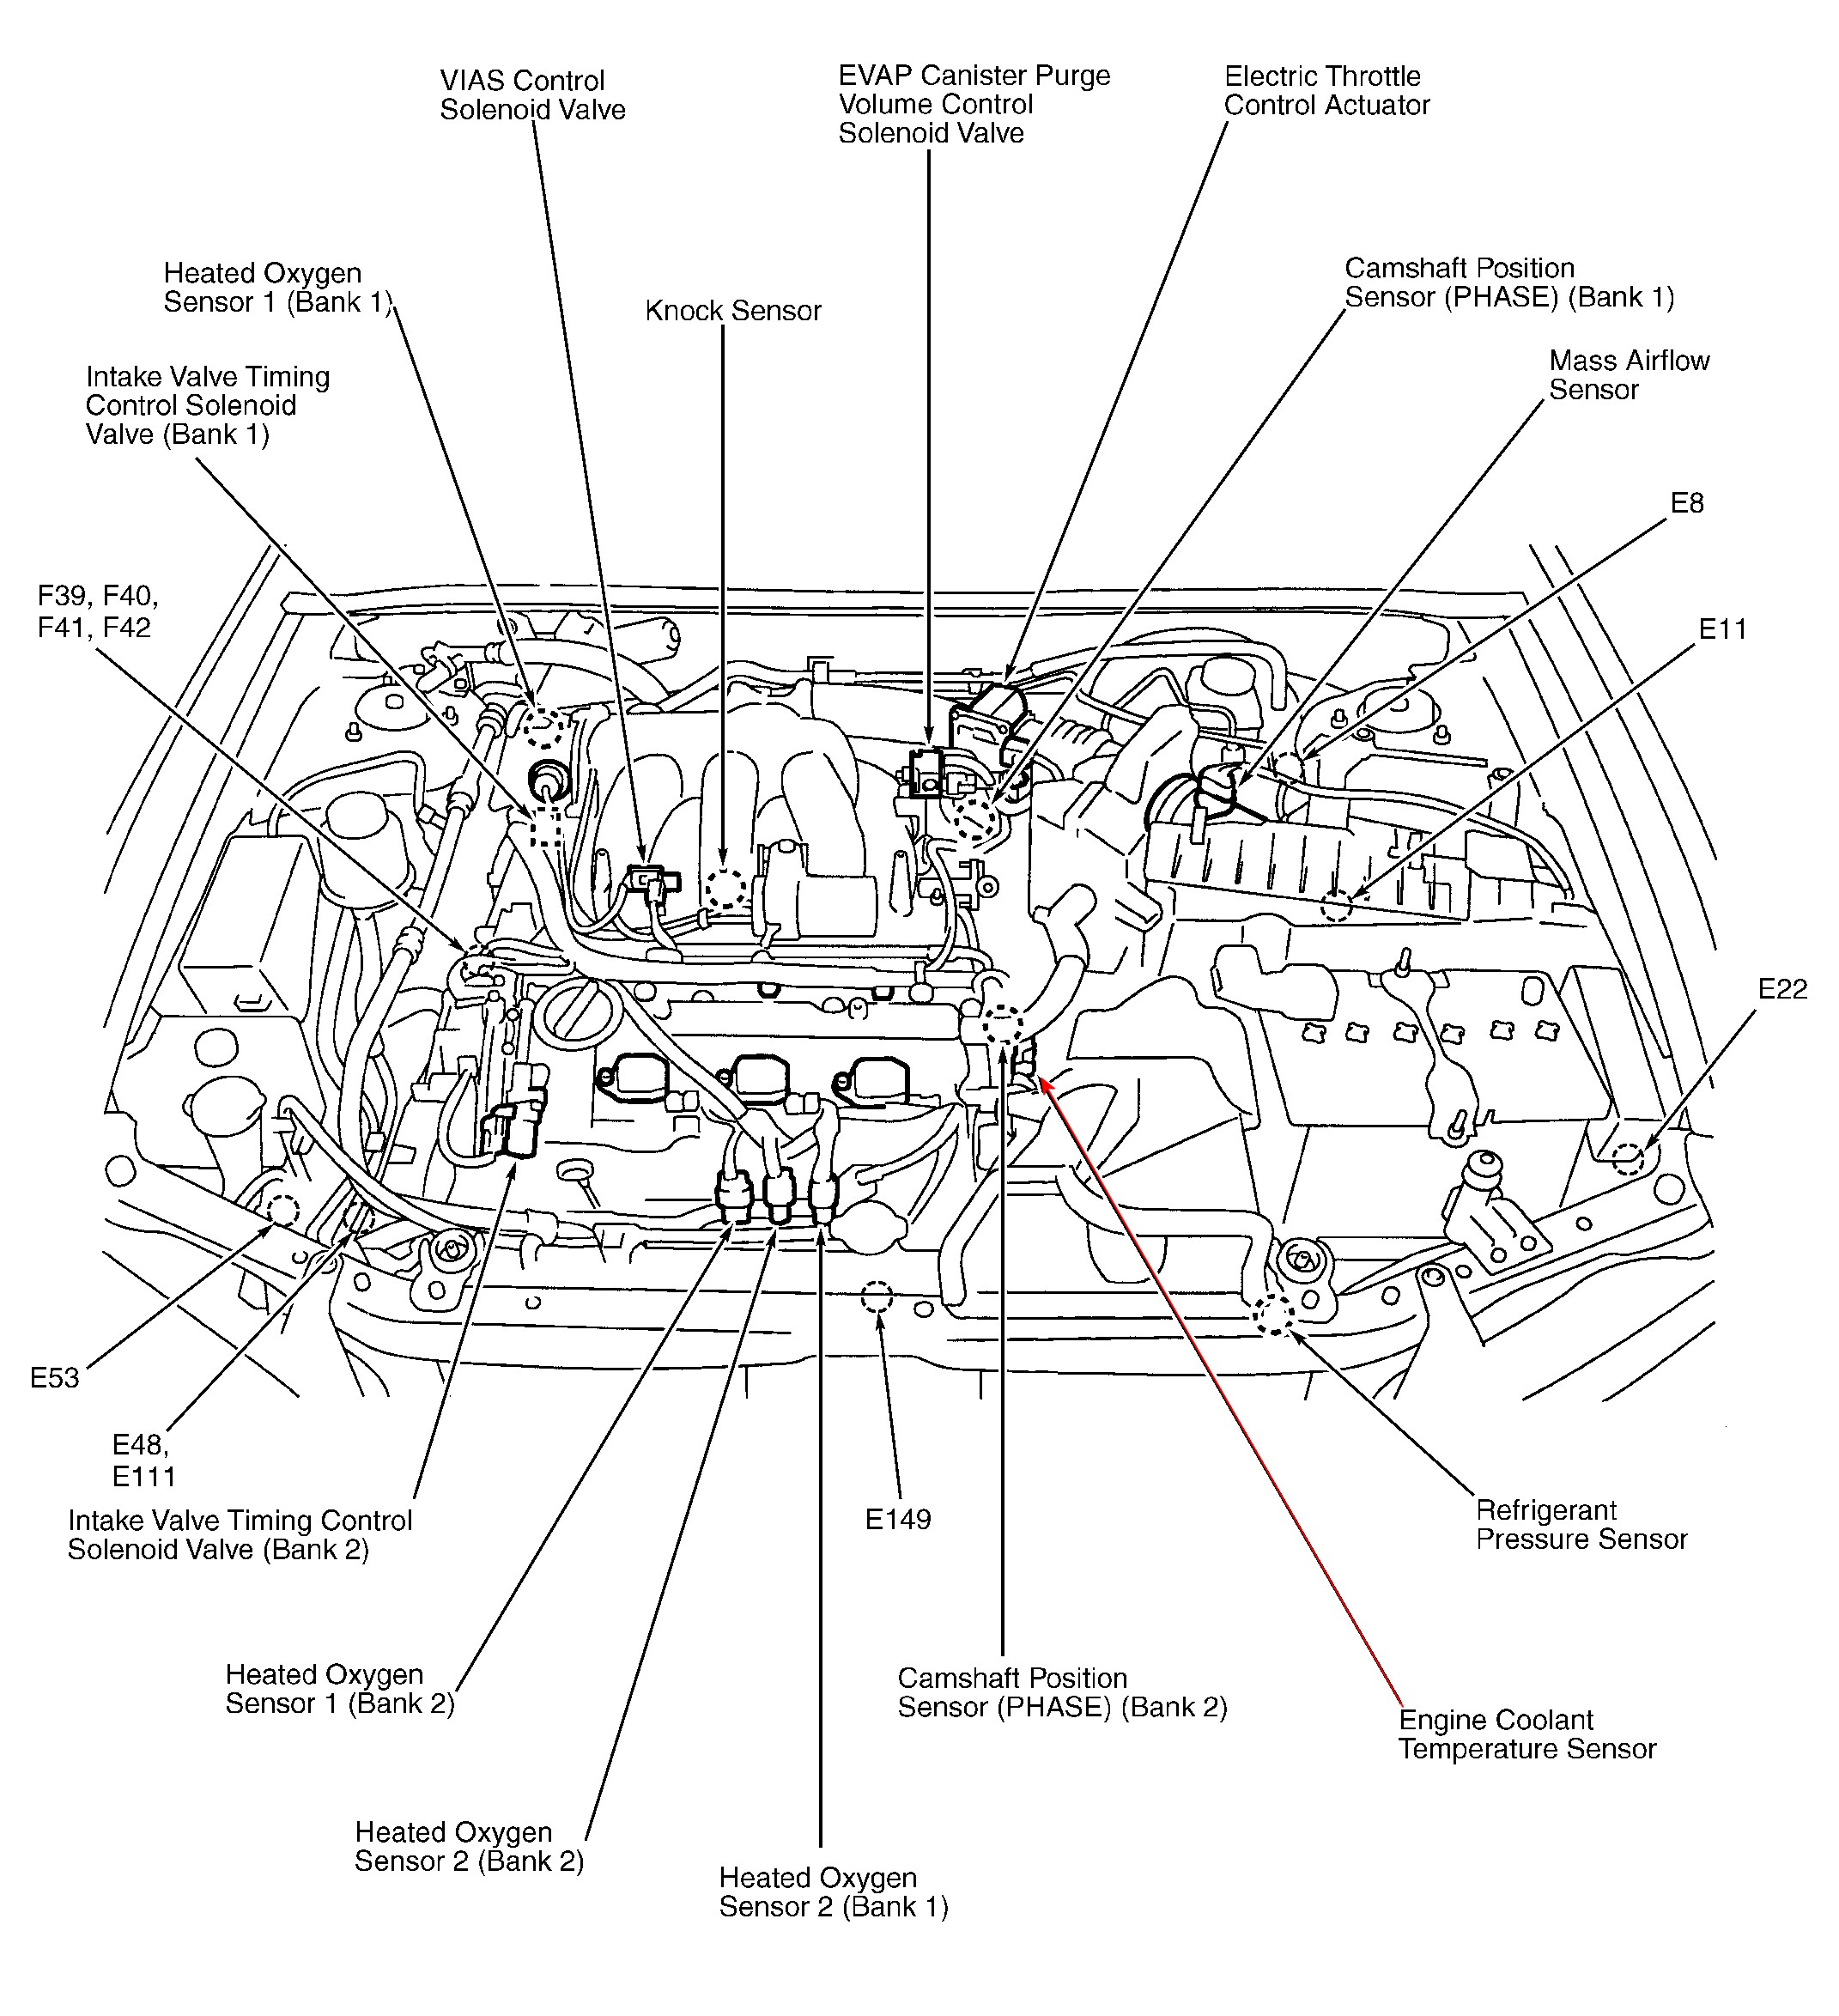 2006 Nissan Frontier Engine Diagram Likewise 2001 Nissan Pathfinder Wiring Diagram as Well 1996 Nissan